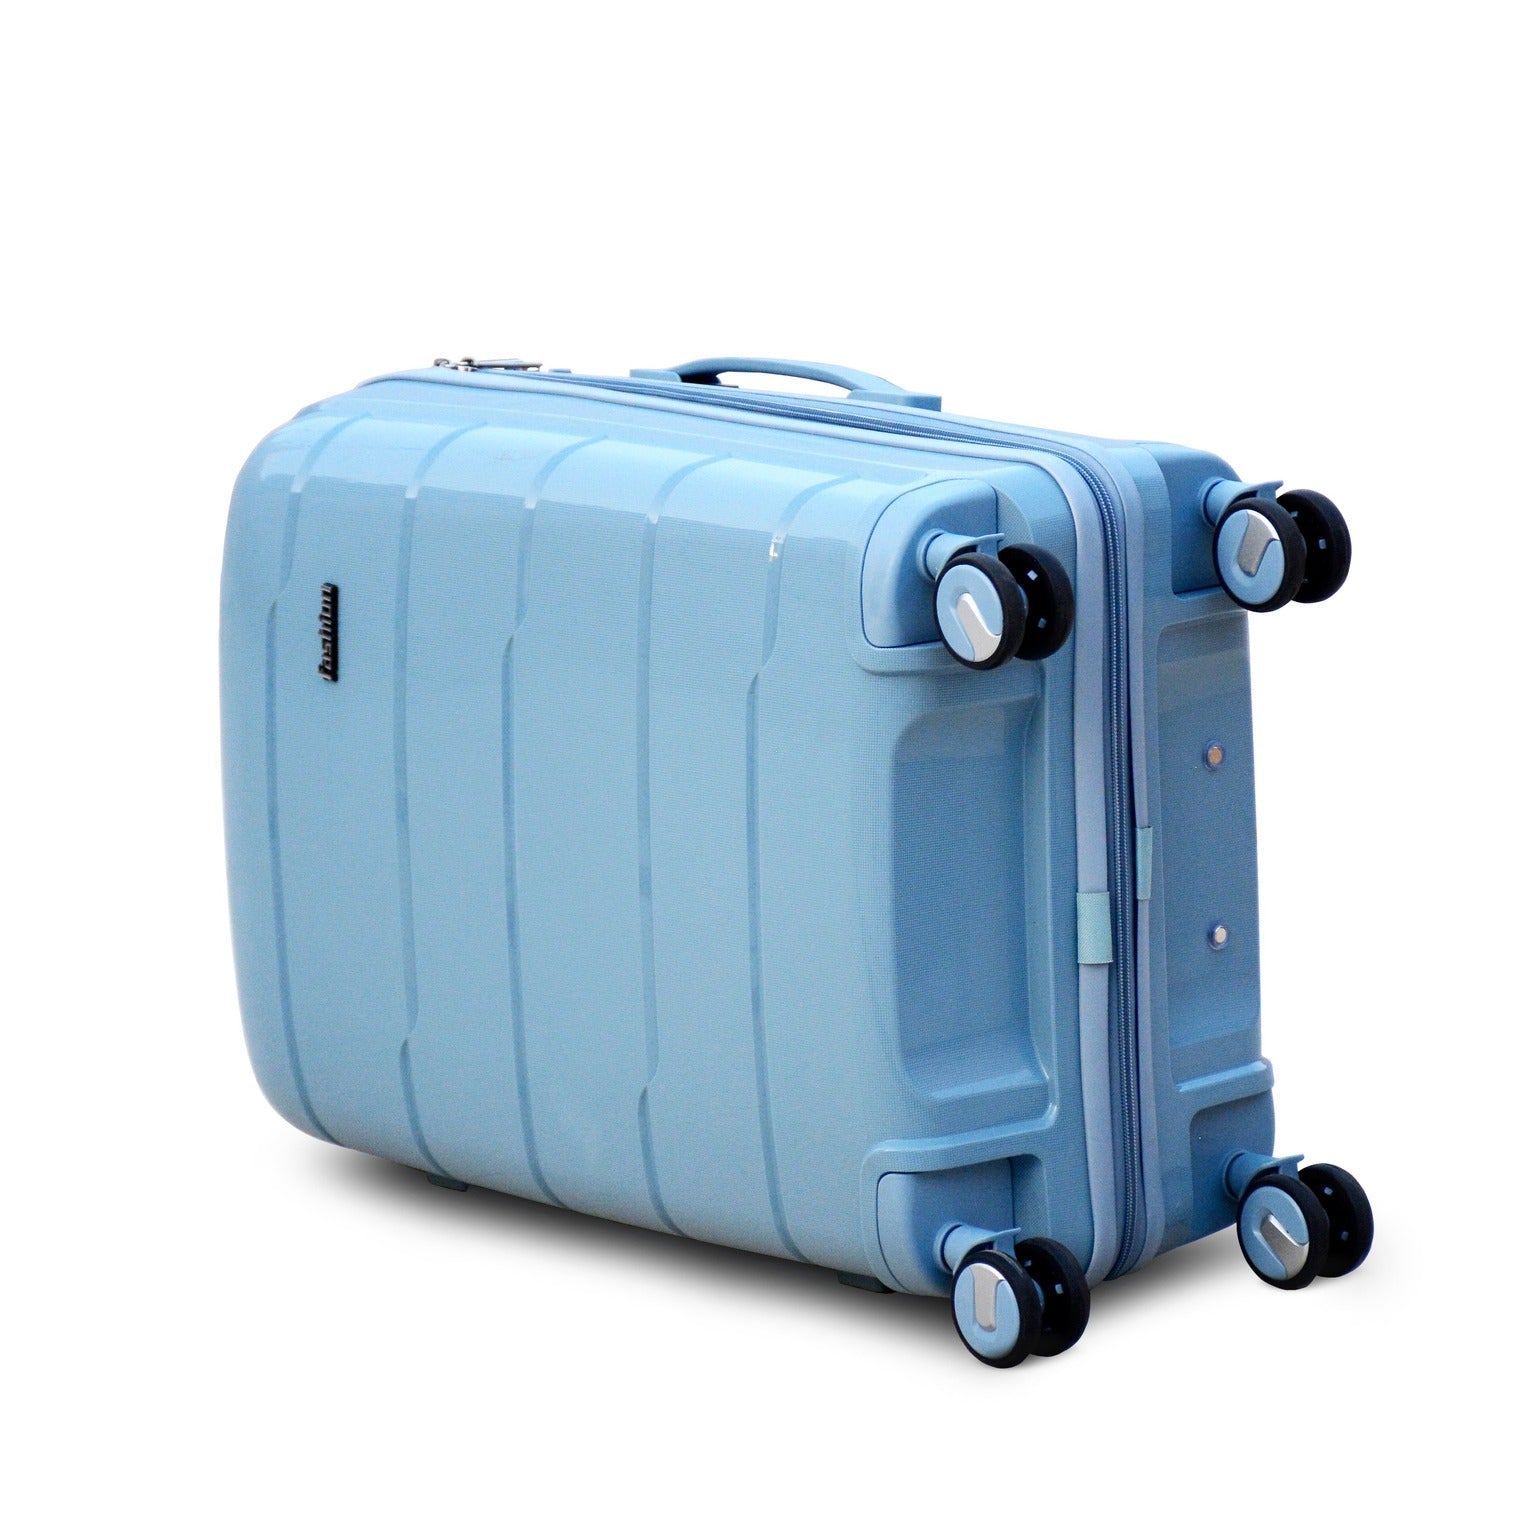 28" Grey Colour Non Expandable Ceramic PP Luggage Lightweight Hard Case Trolley Bag With Double Spinner Wheel